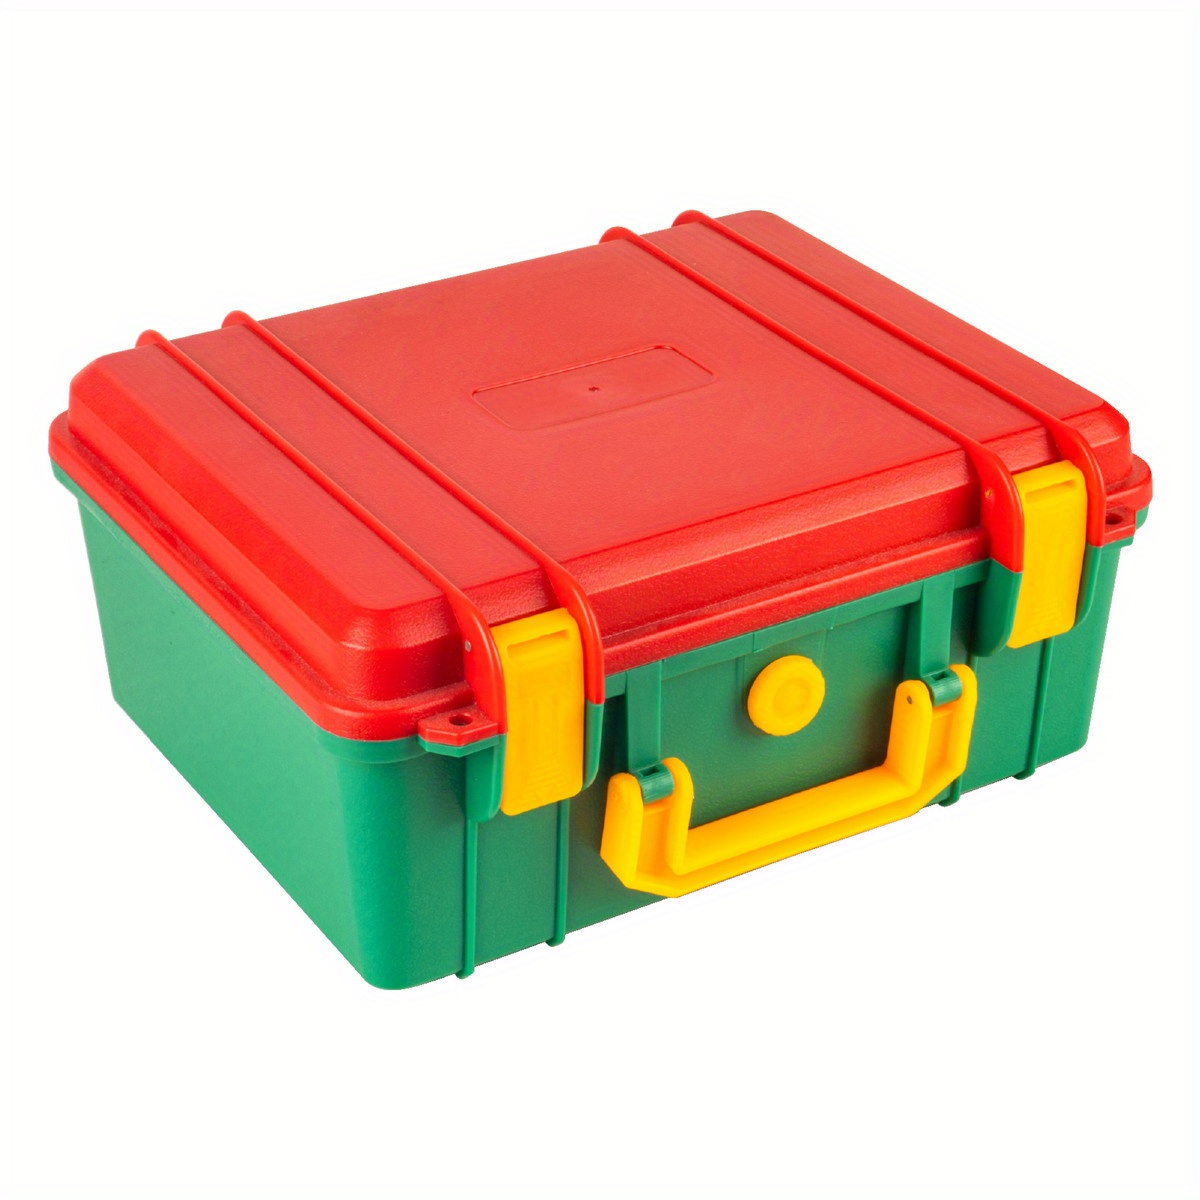 1pc Waterproof Plastic Tool Case 11 02x9 45x5 12 Multicolor Protective  Sponge Interior Portable Storage Box For Hardware Instruments, Shop The  Latest Trends